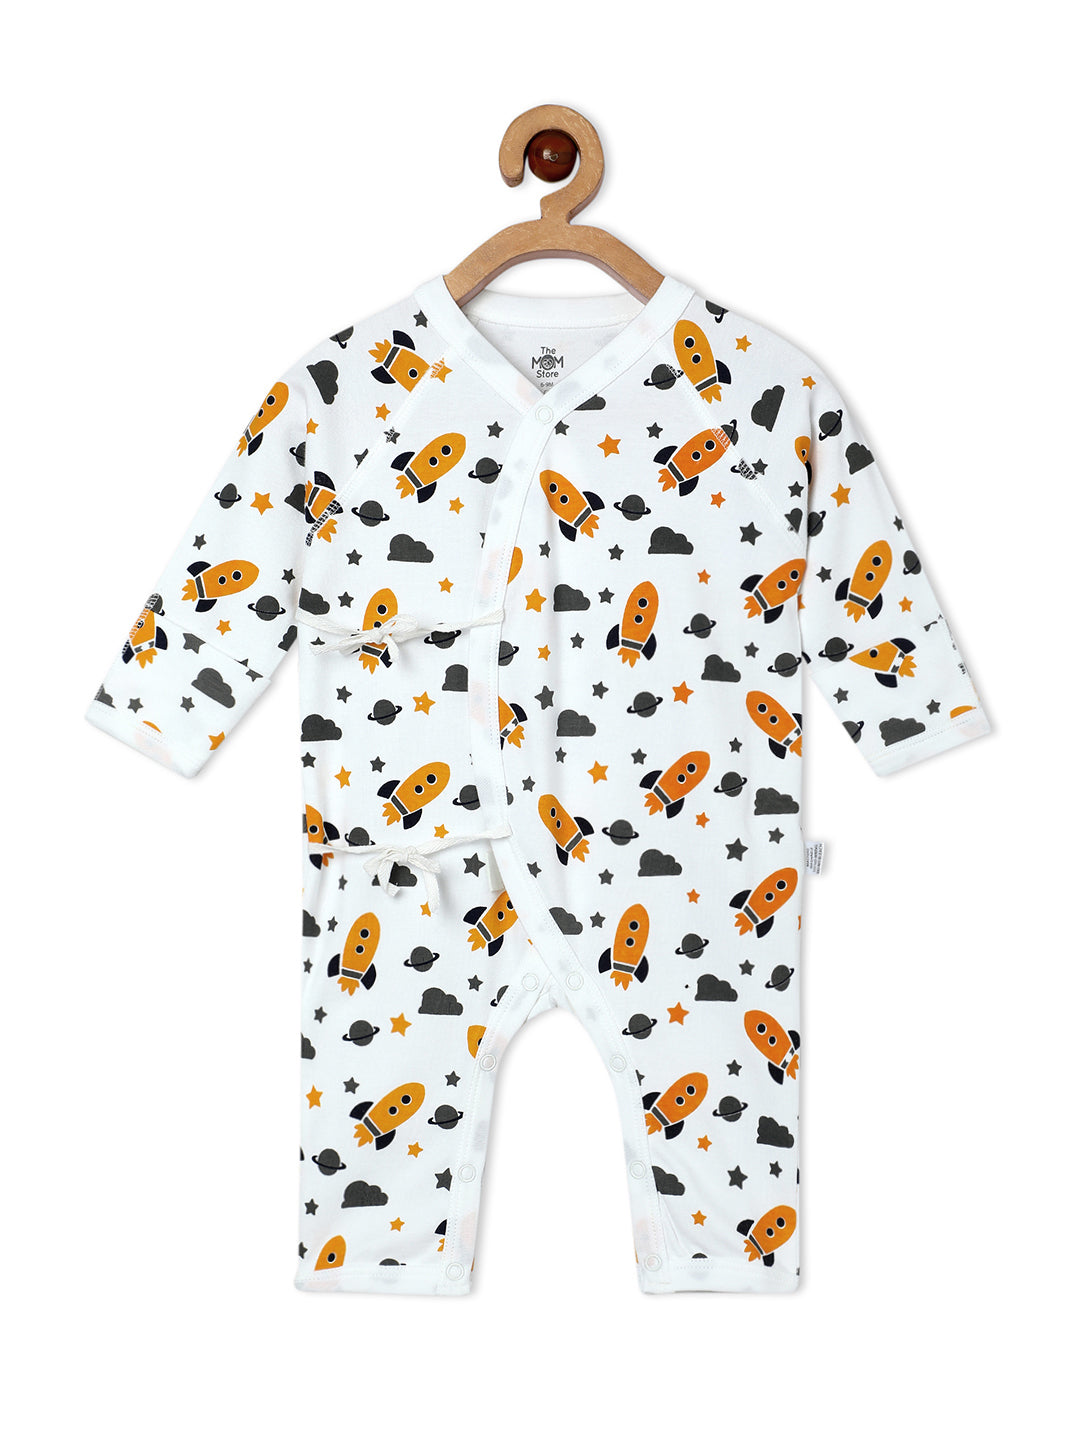 Jabla Style Infant Romper Combo of 3-Planet World-Submarine Ride-Tour to the Space